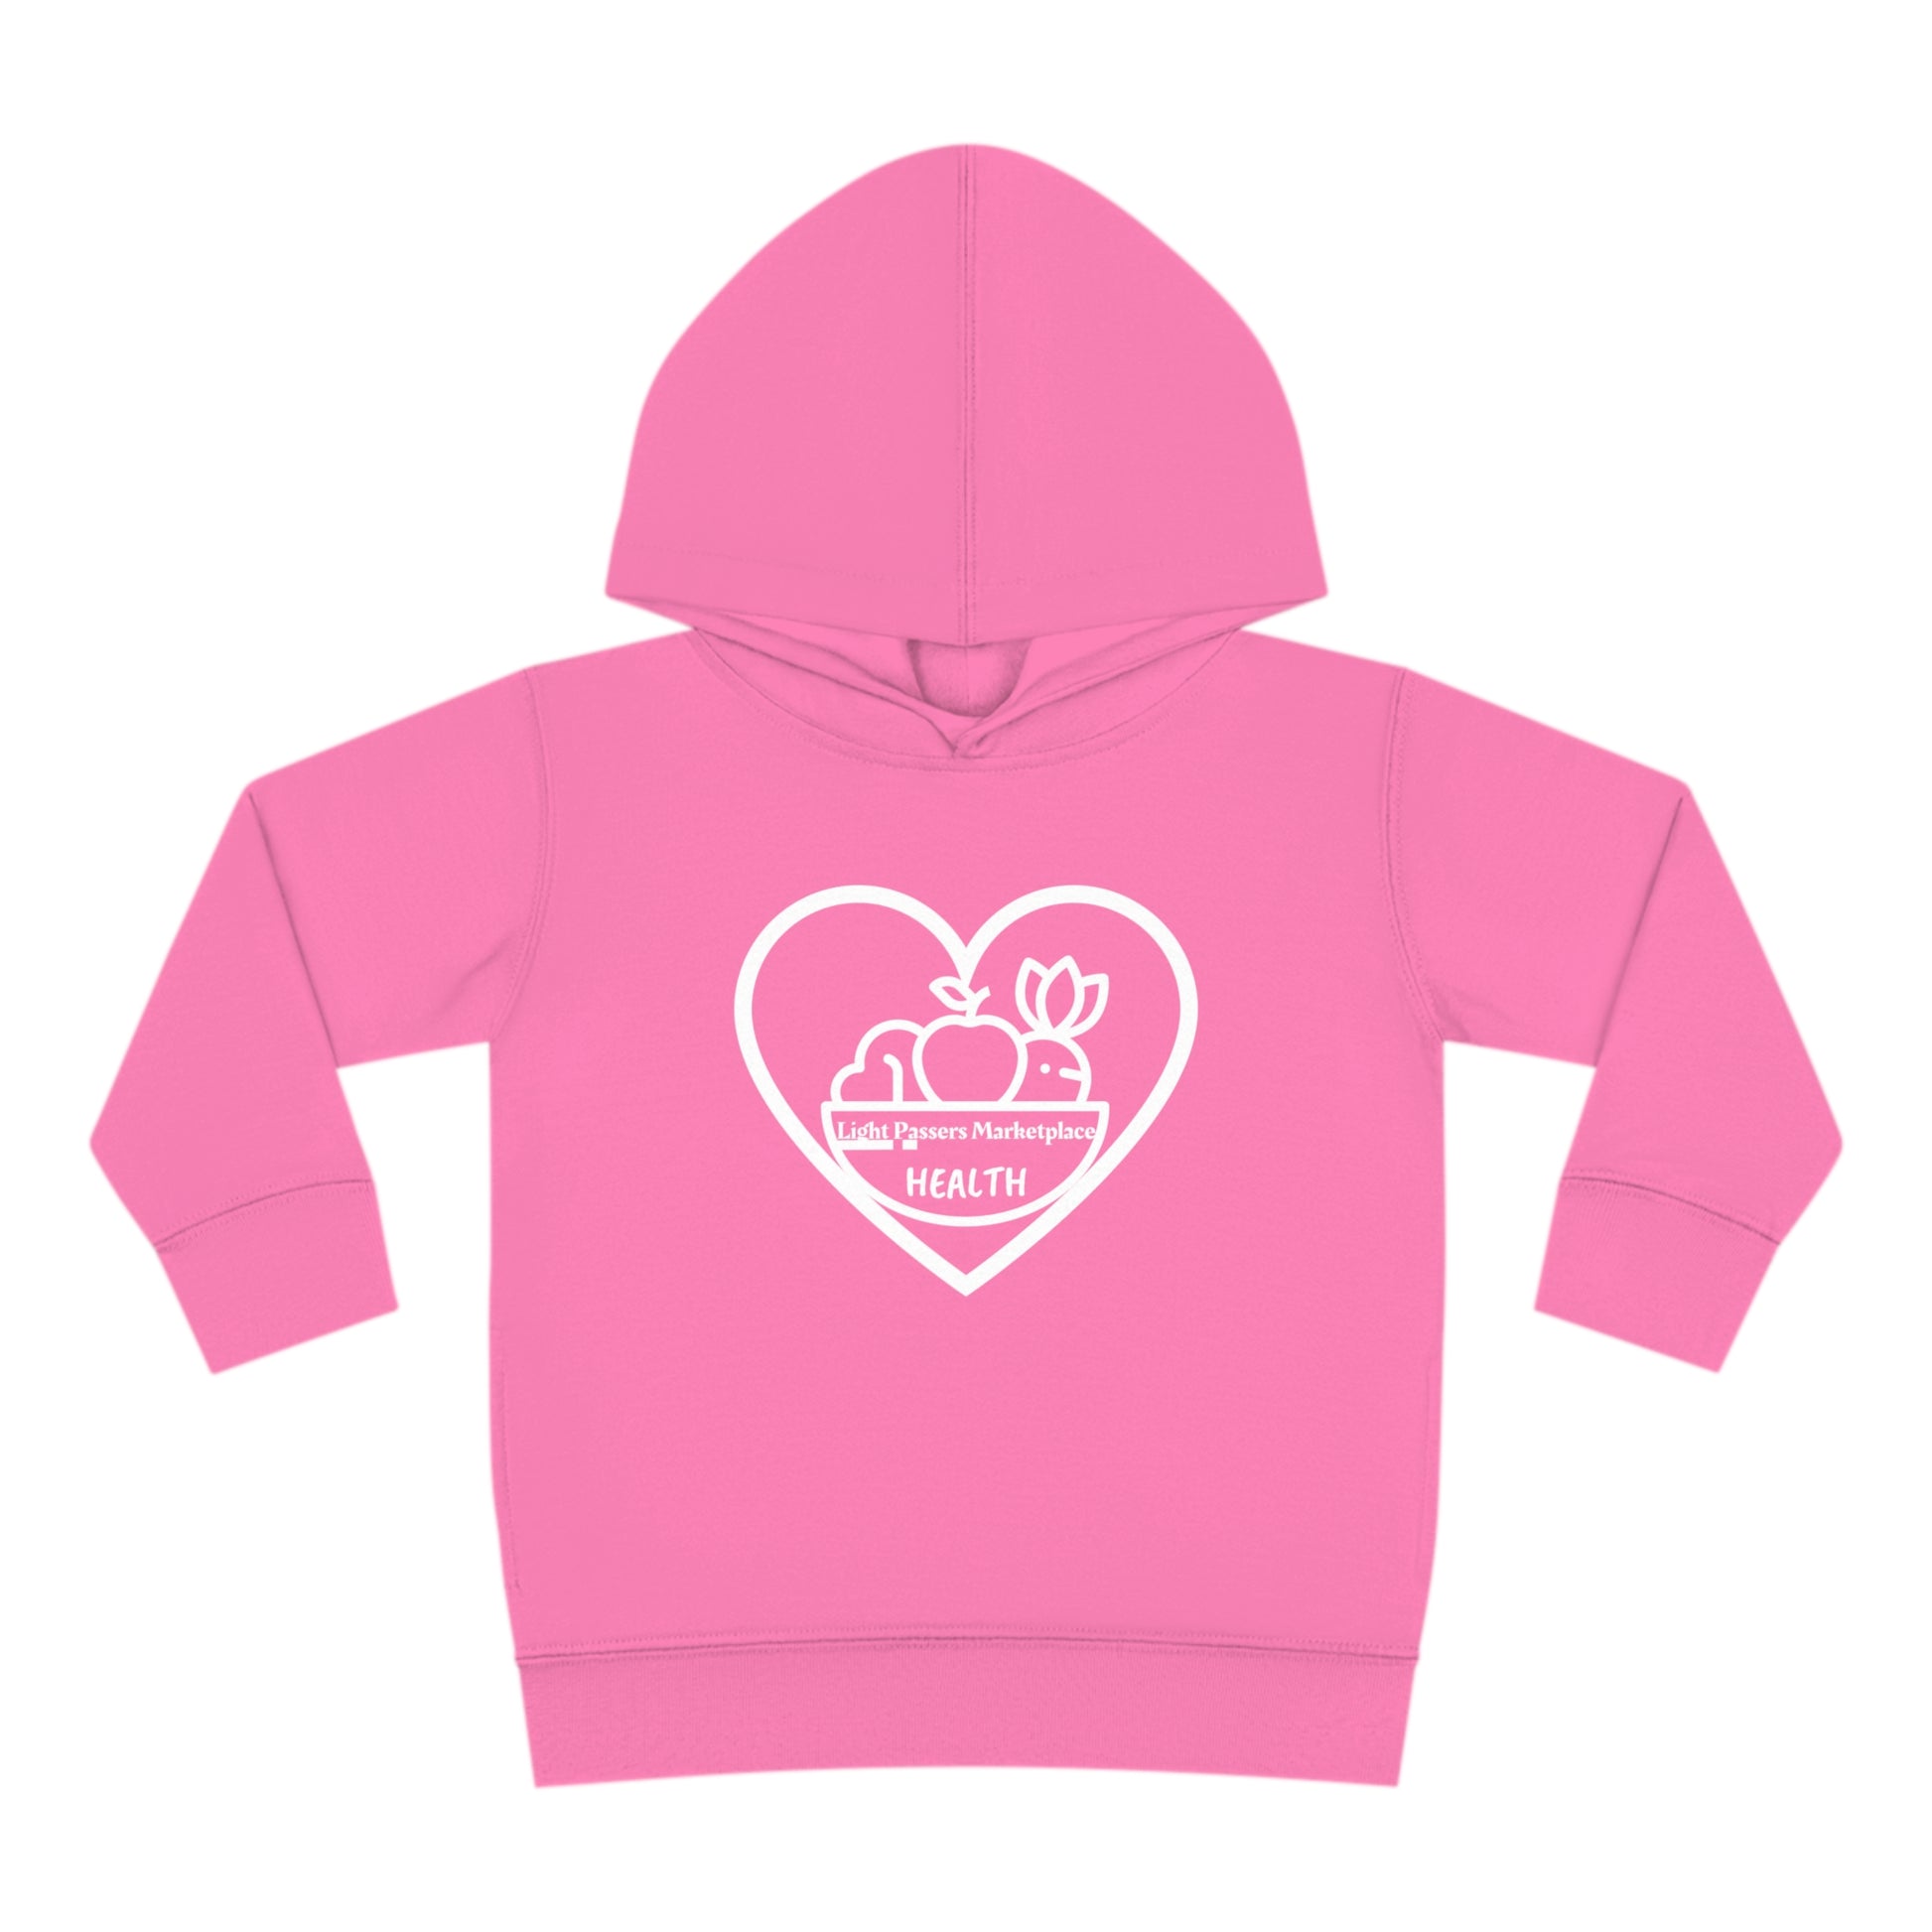 A toddler hoodie featuring a heart and fruit logo, with side seam pockets and cover-stitched details for durability and comfort. Made of 60% cotton, 40% polyester blend.